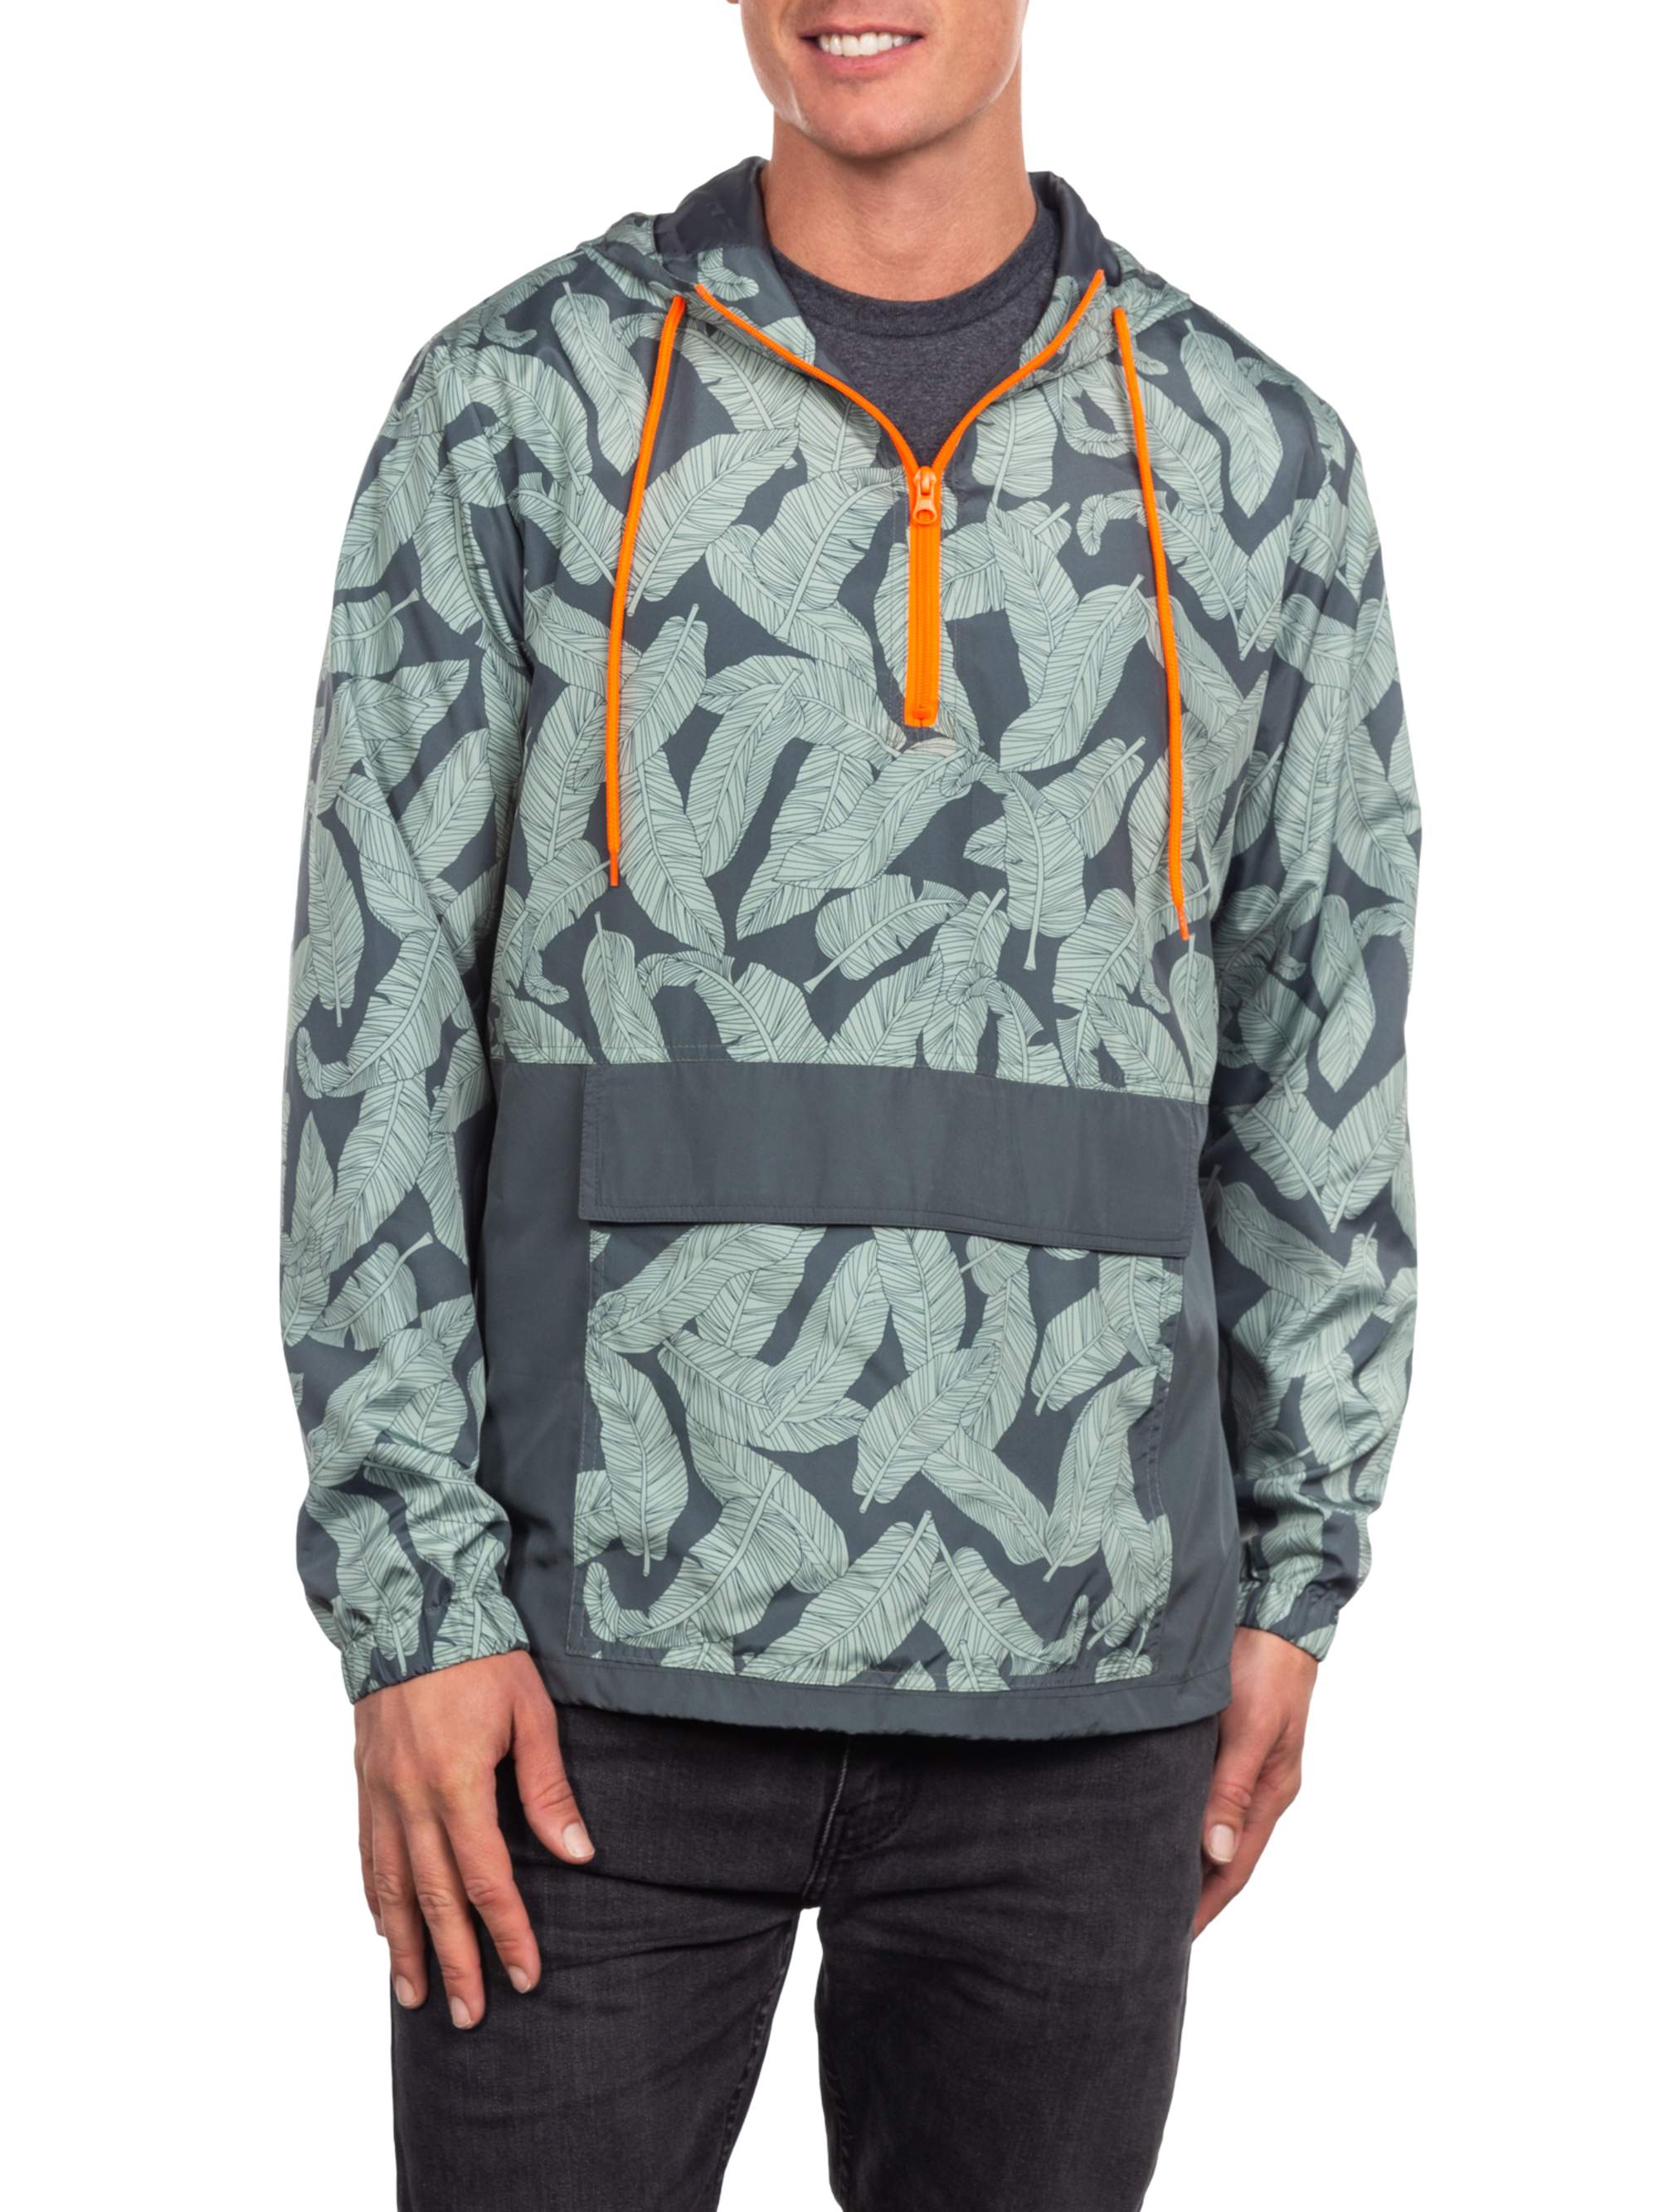 Men's Light Weight Hooded Anorak, up to Size 3XL - image 1 of 2